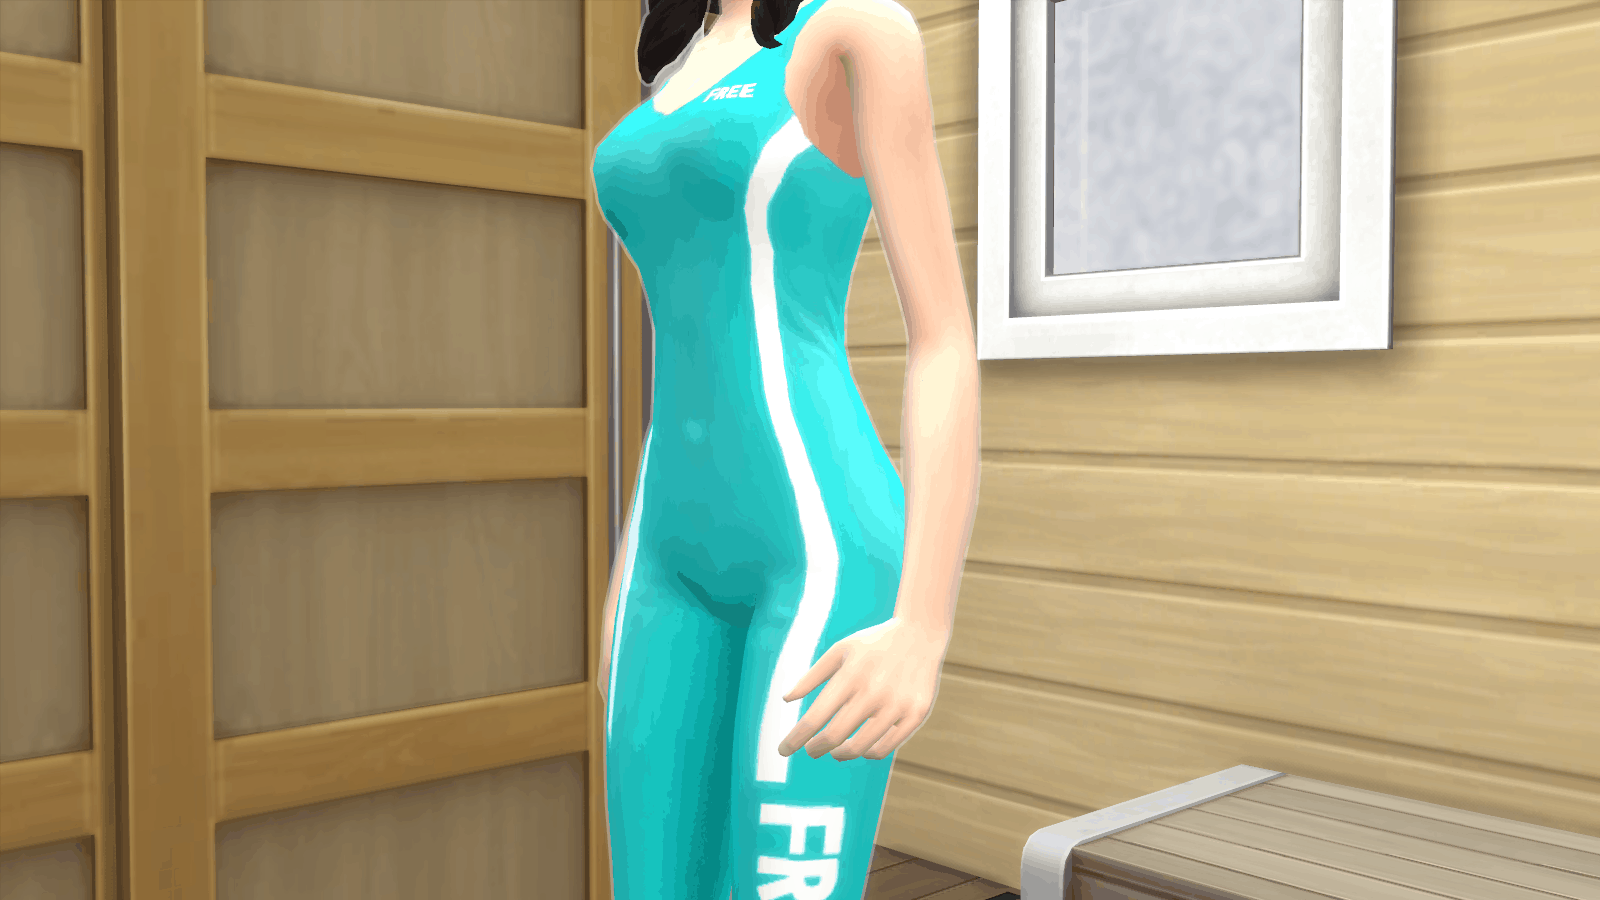 Free Swimsuit Mod Sims 4 Mod Mod For Sims 4